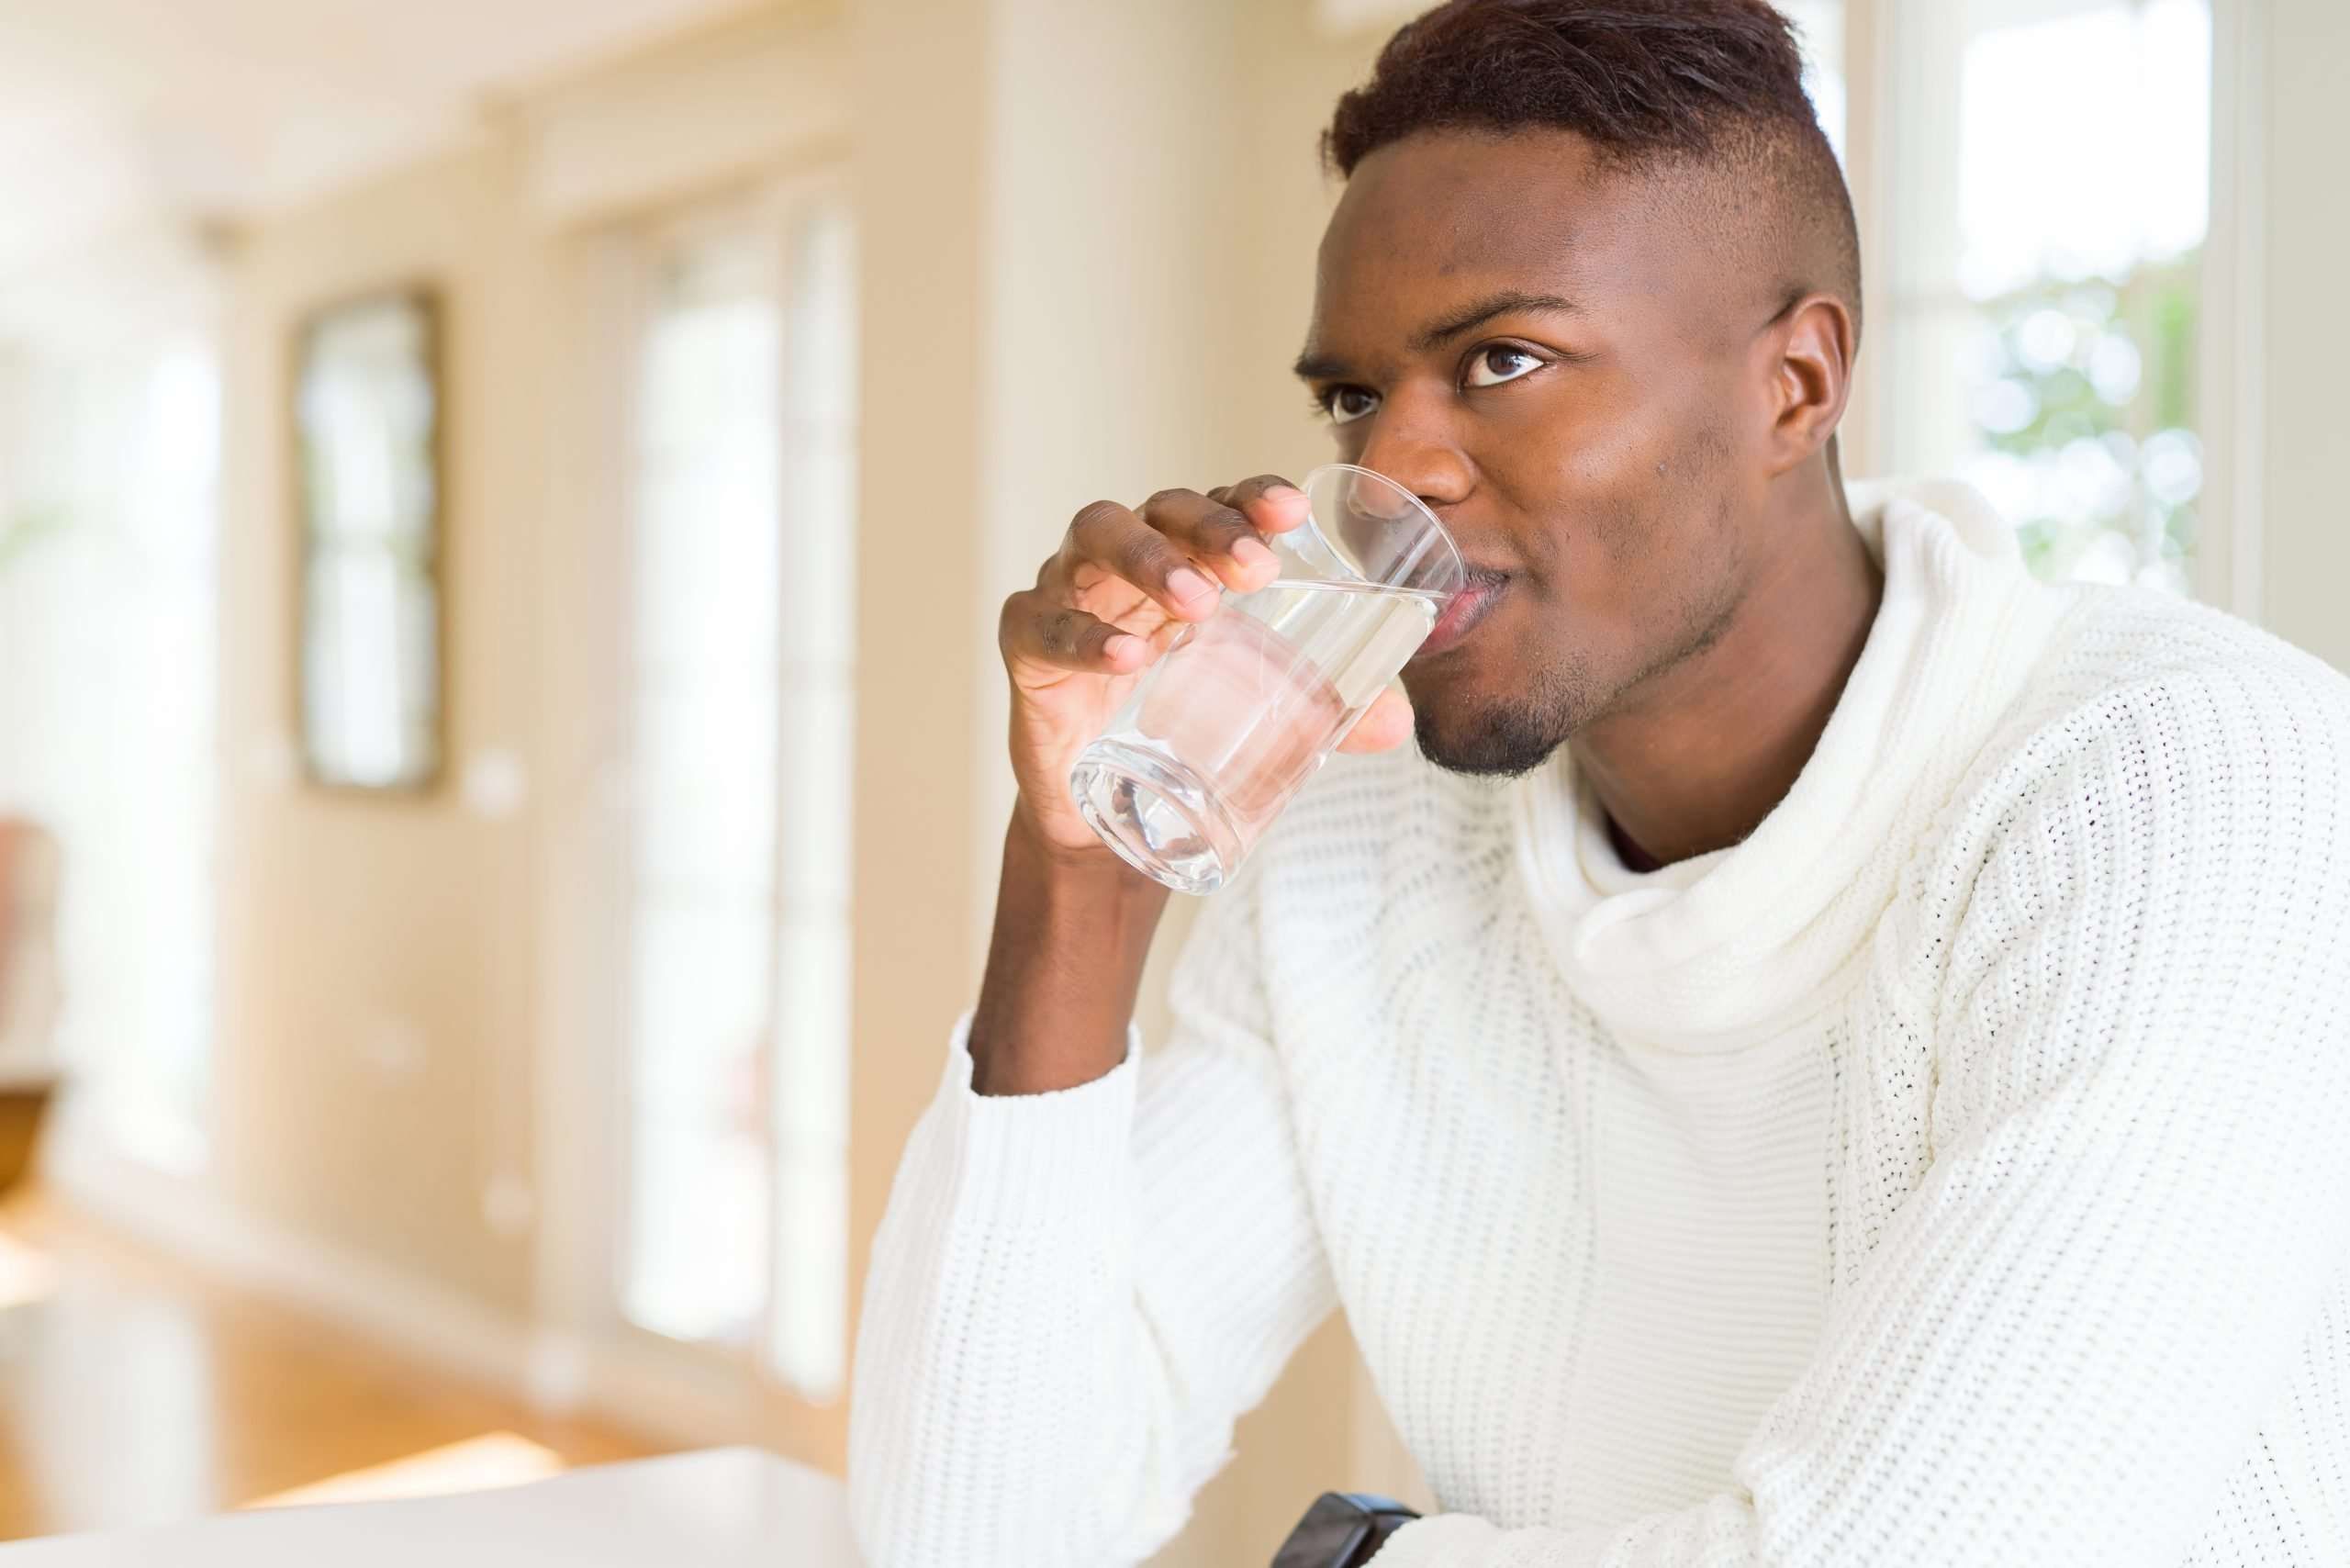 Dehydration Affects Blood Pressure and Lab Blood Test Results